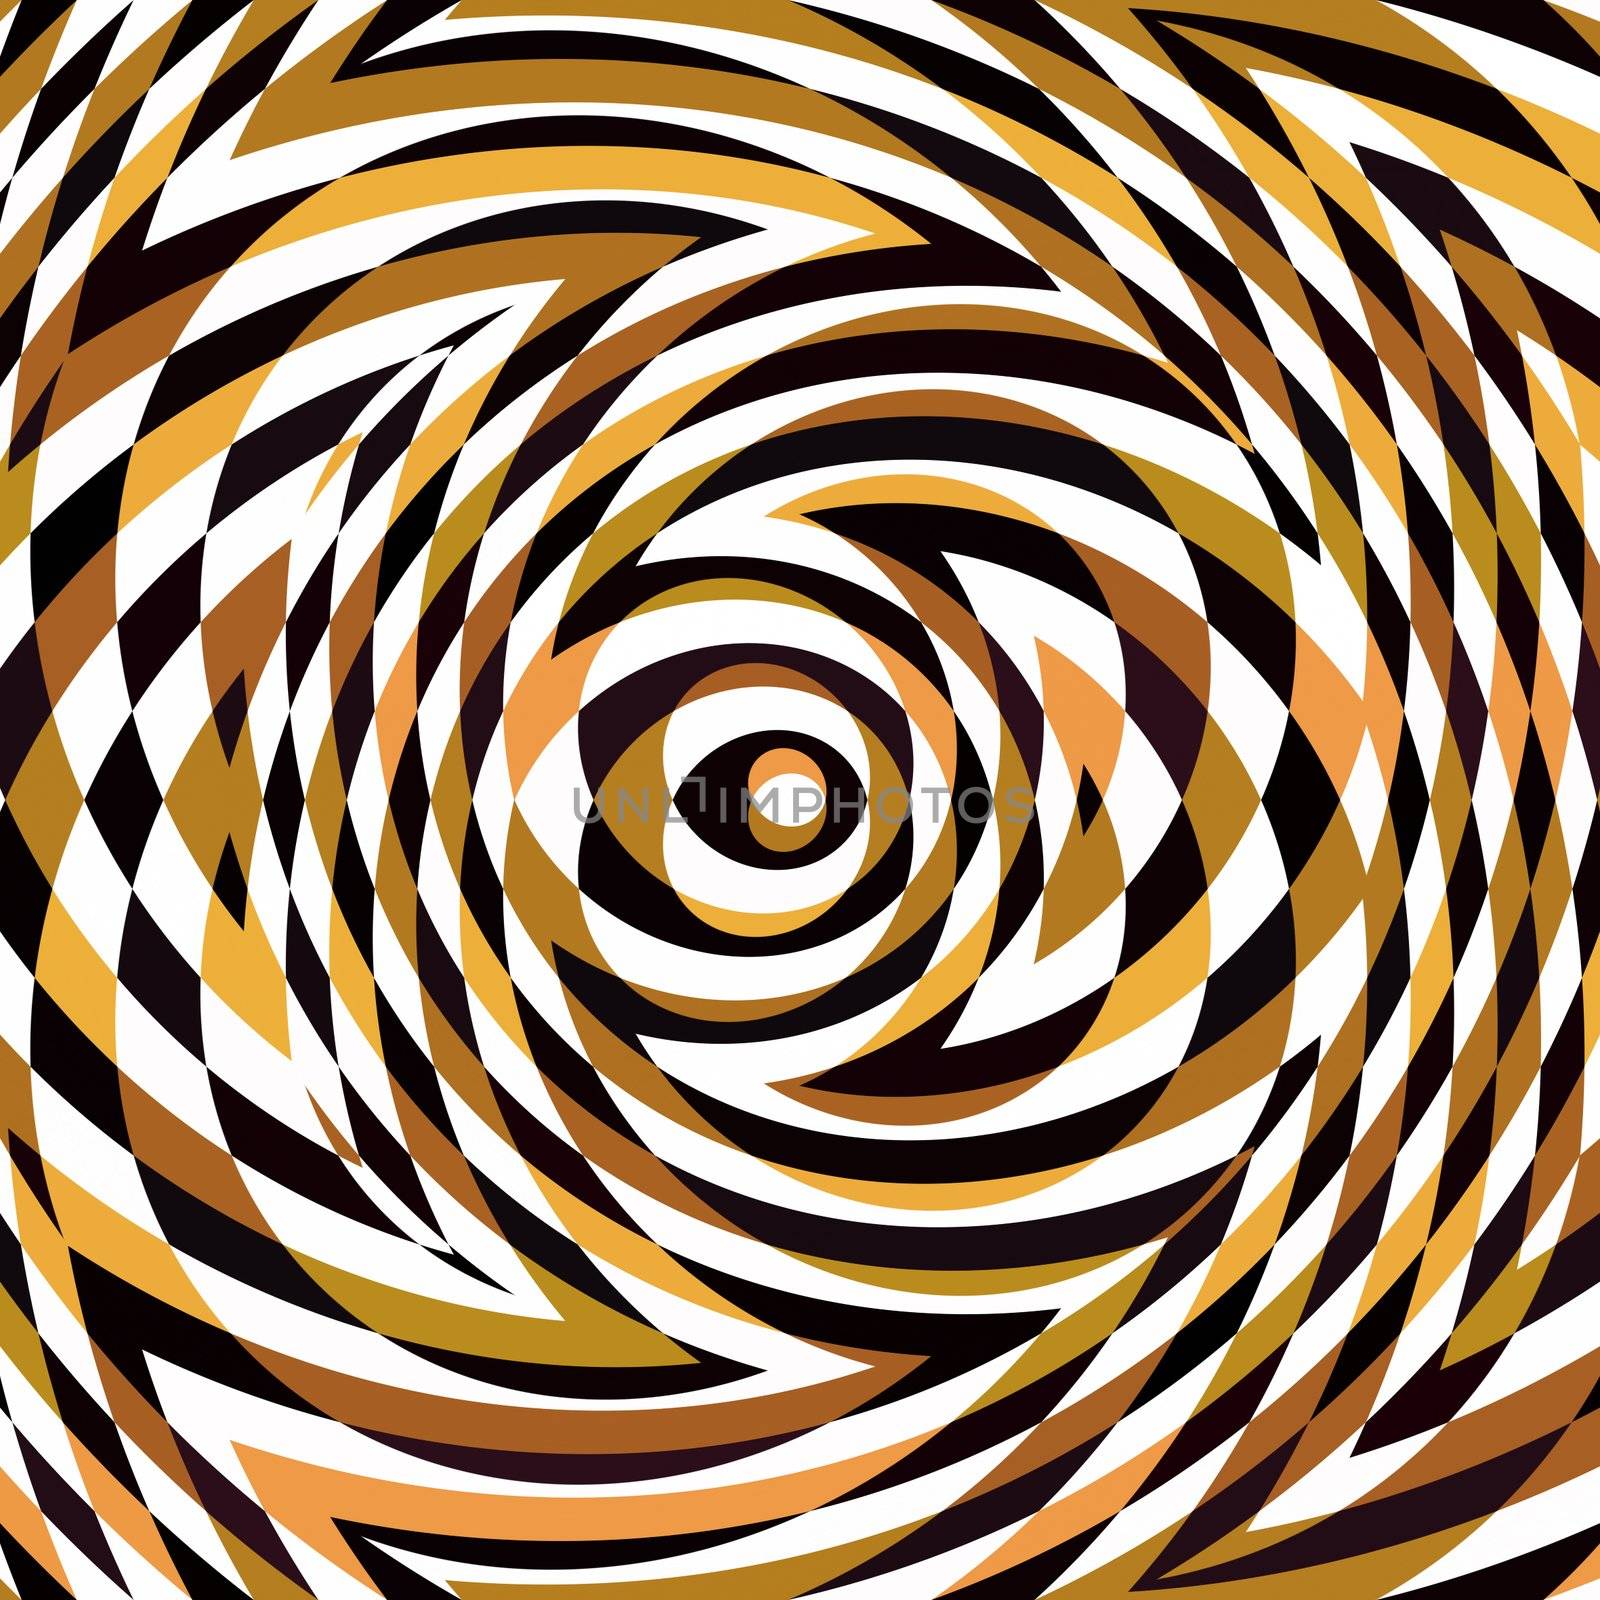 texture of swirly circles in brown, black and white